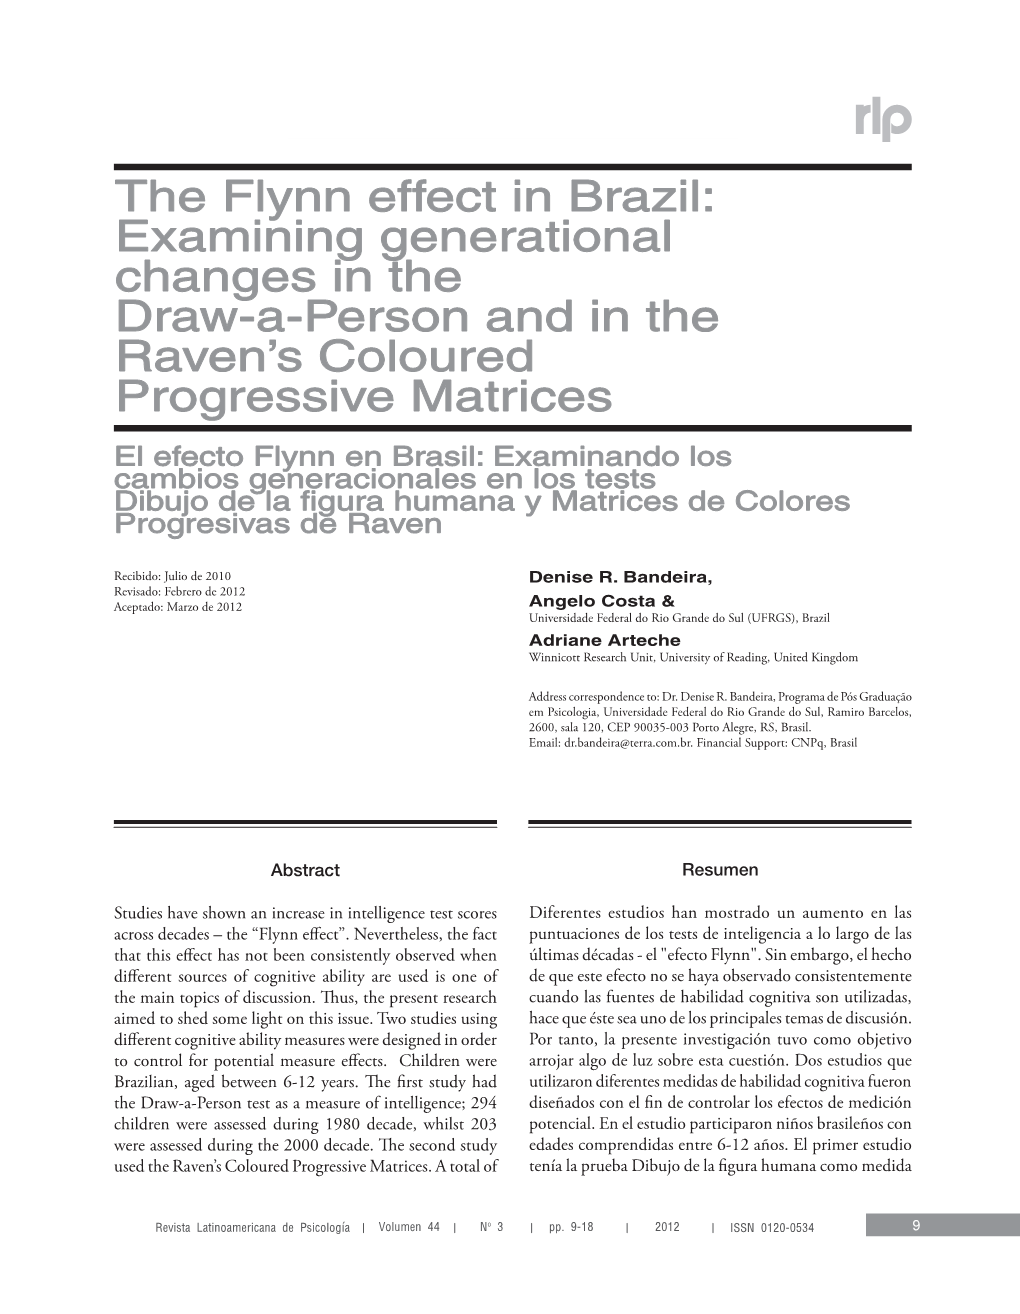 The Flynn Effect in Brazil: Examining Generational Changes in the Draw-A